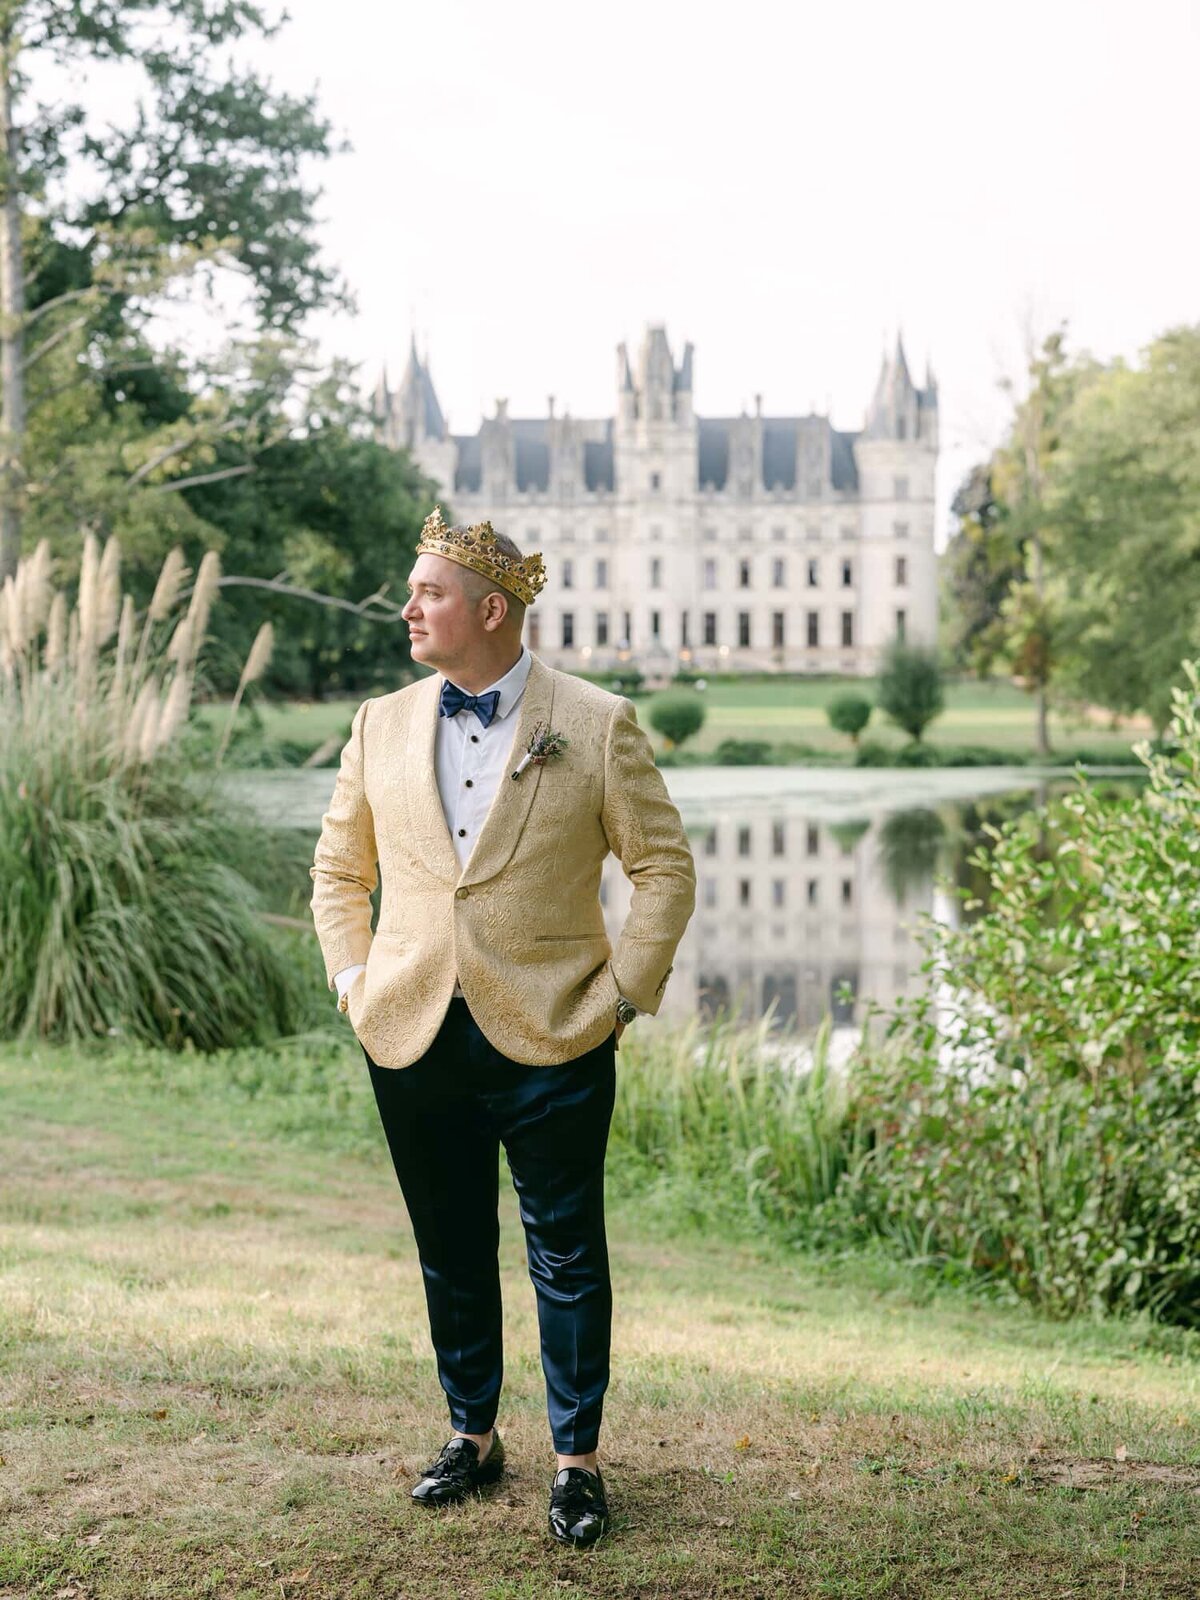 Destination wedding in France - Chateau Challain - Serenity Photography - 64